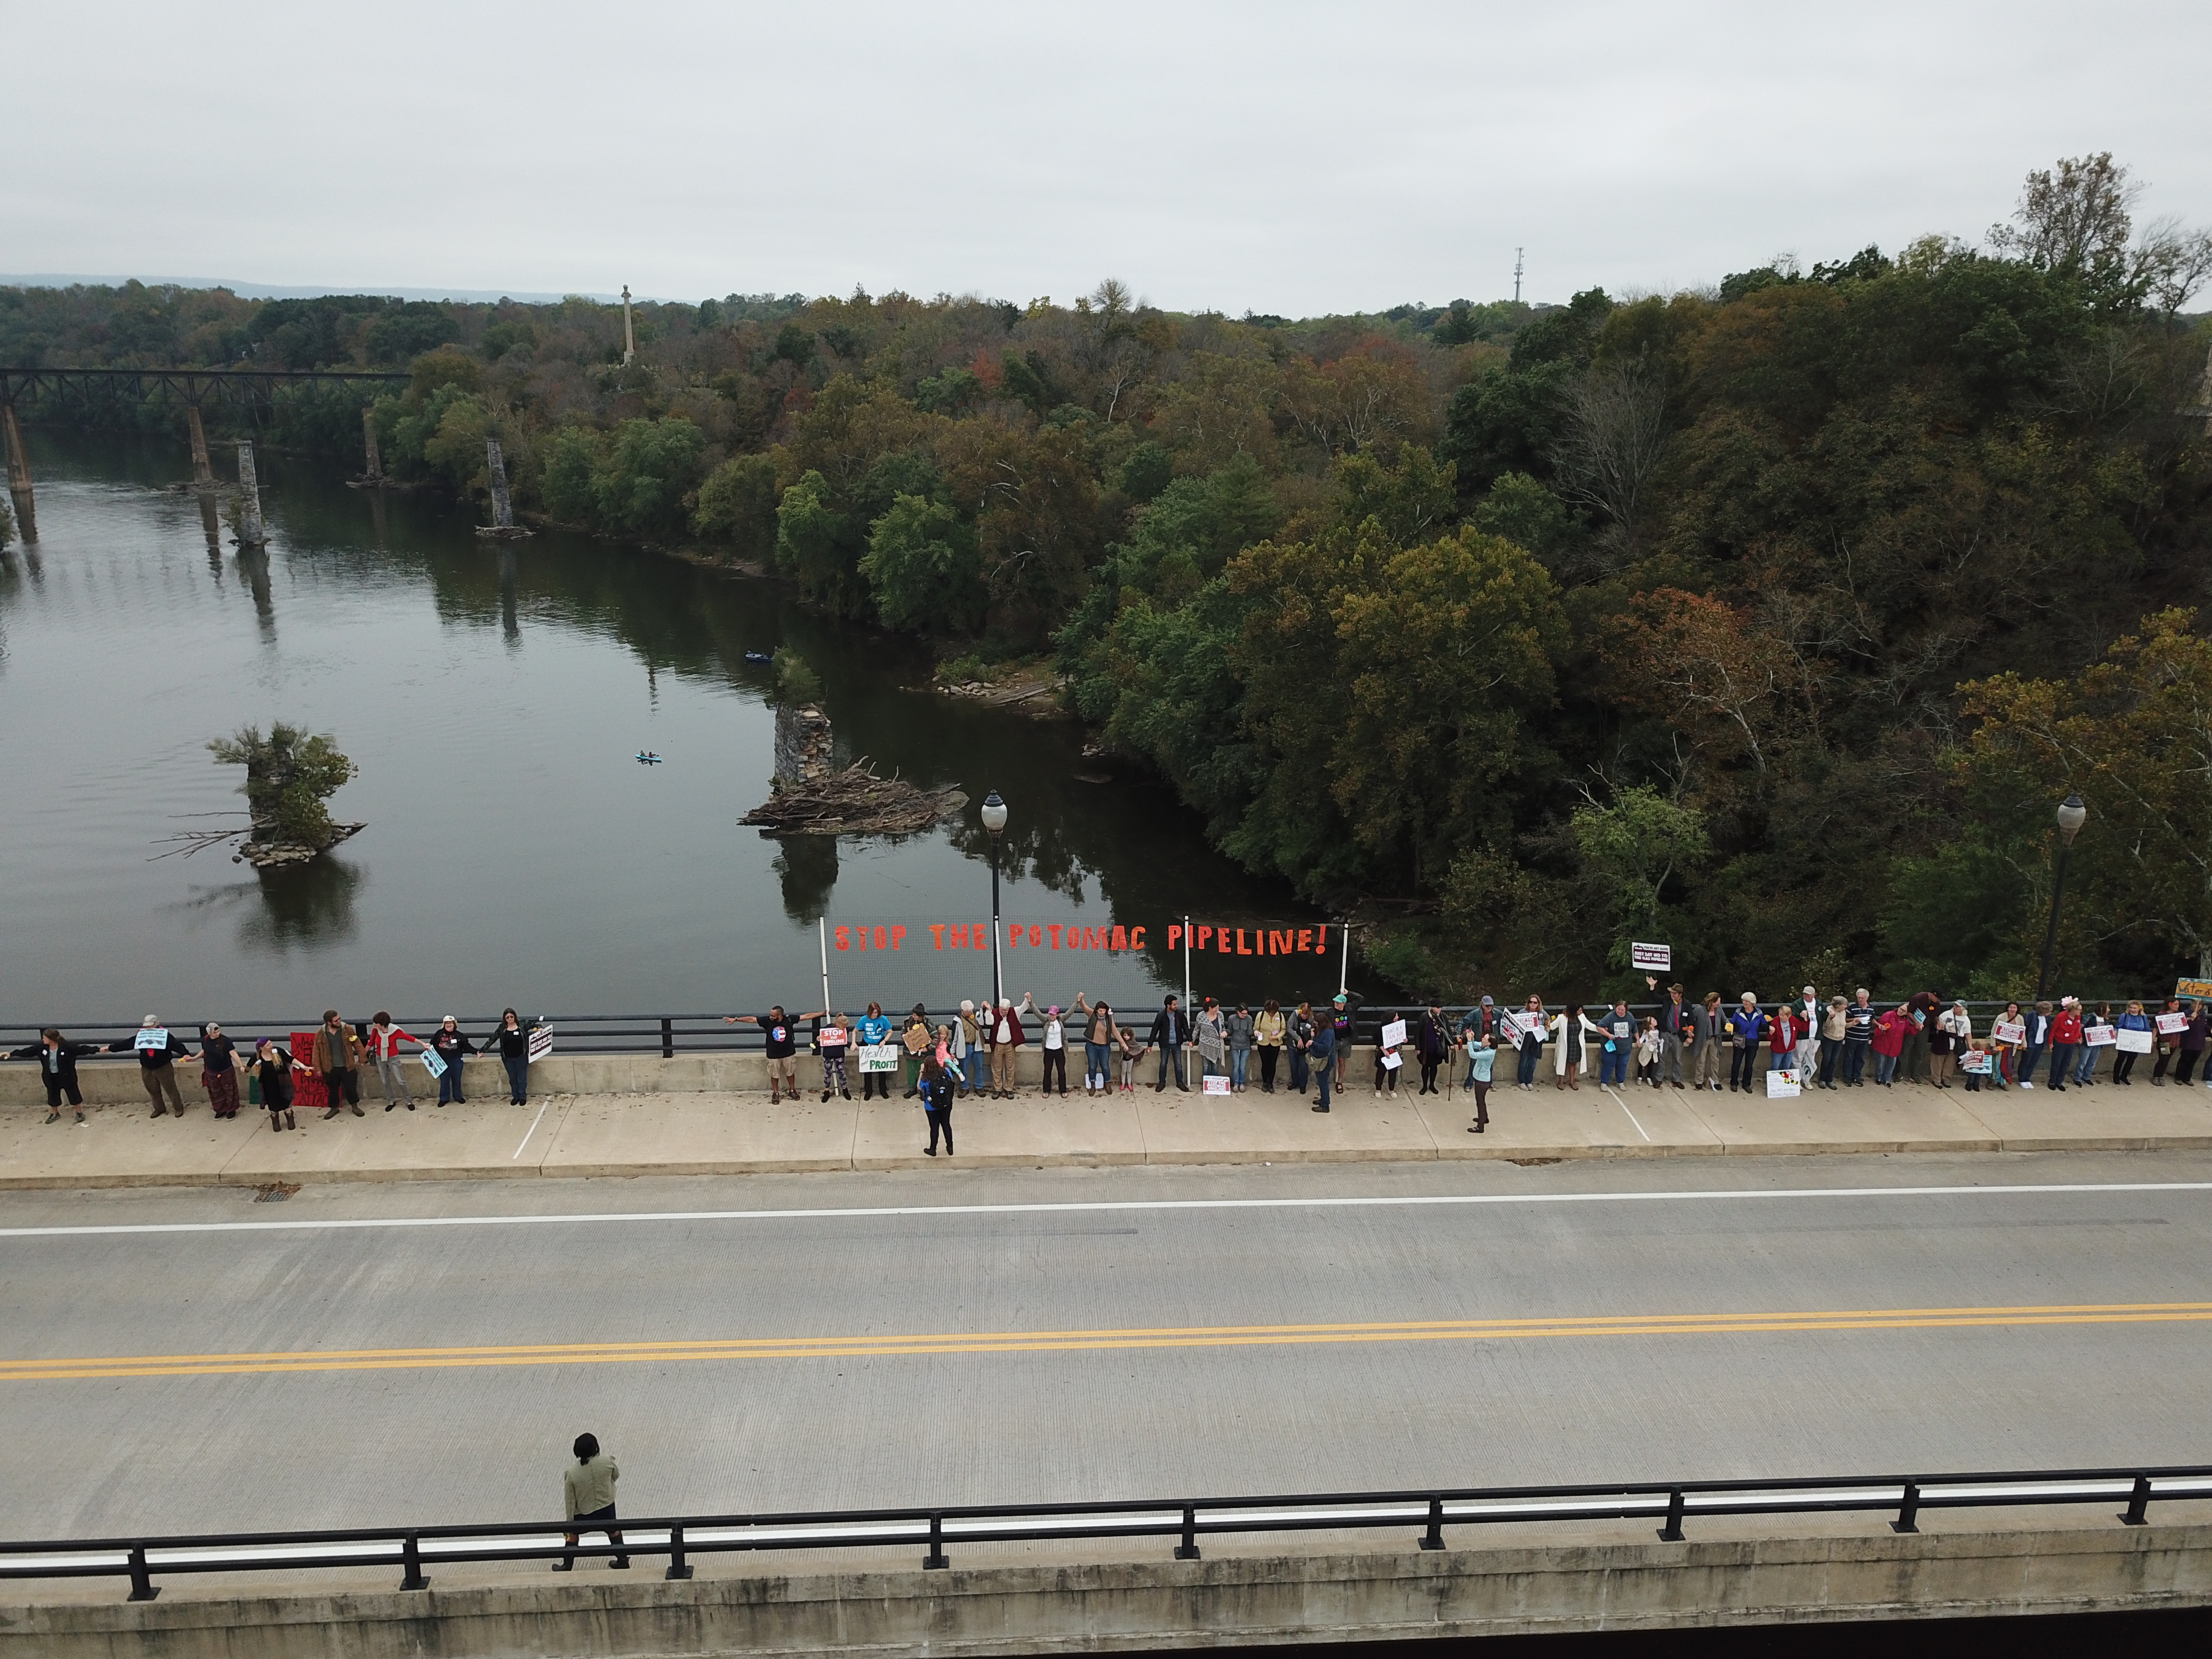 People gathered on bridge with sign "Stop Potomac Pipeline"